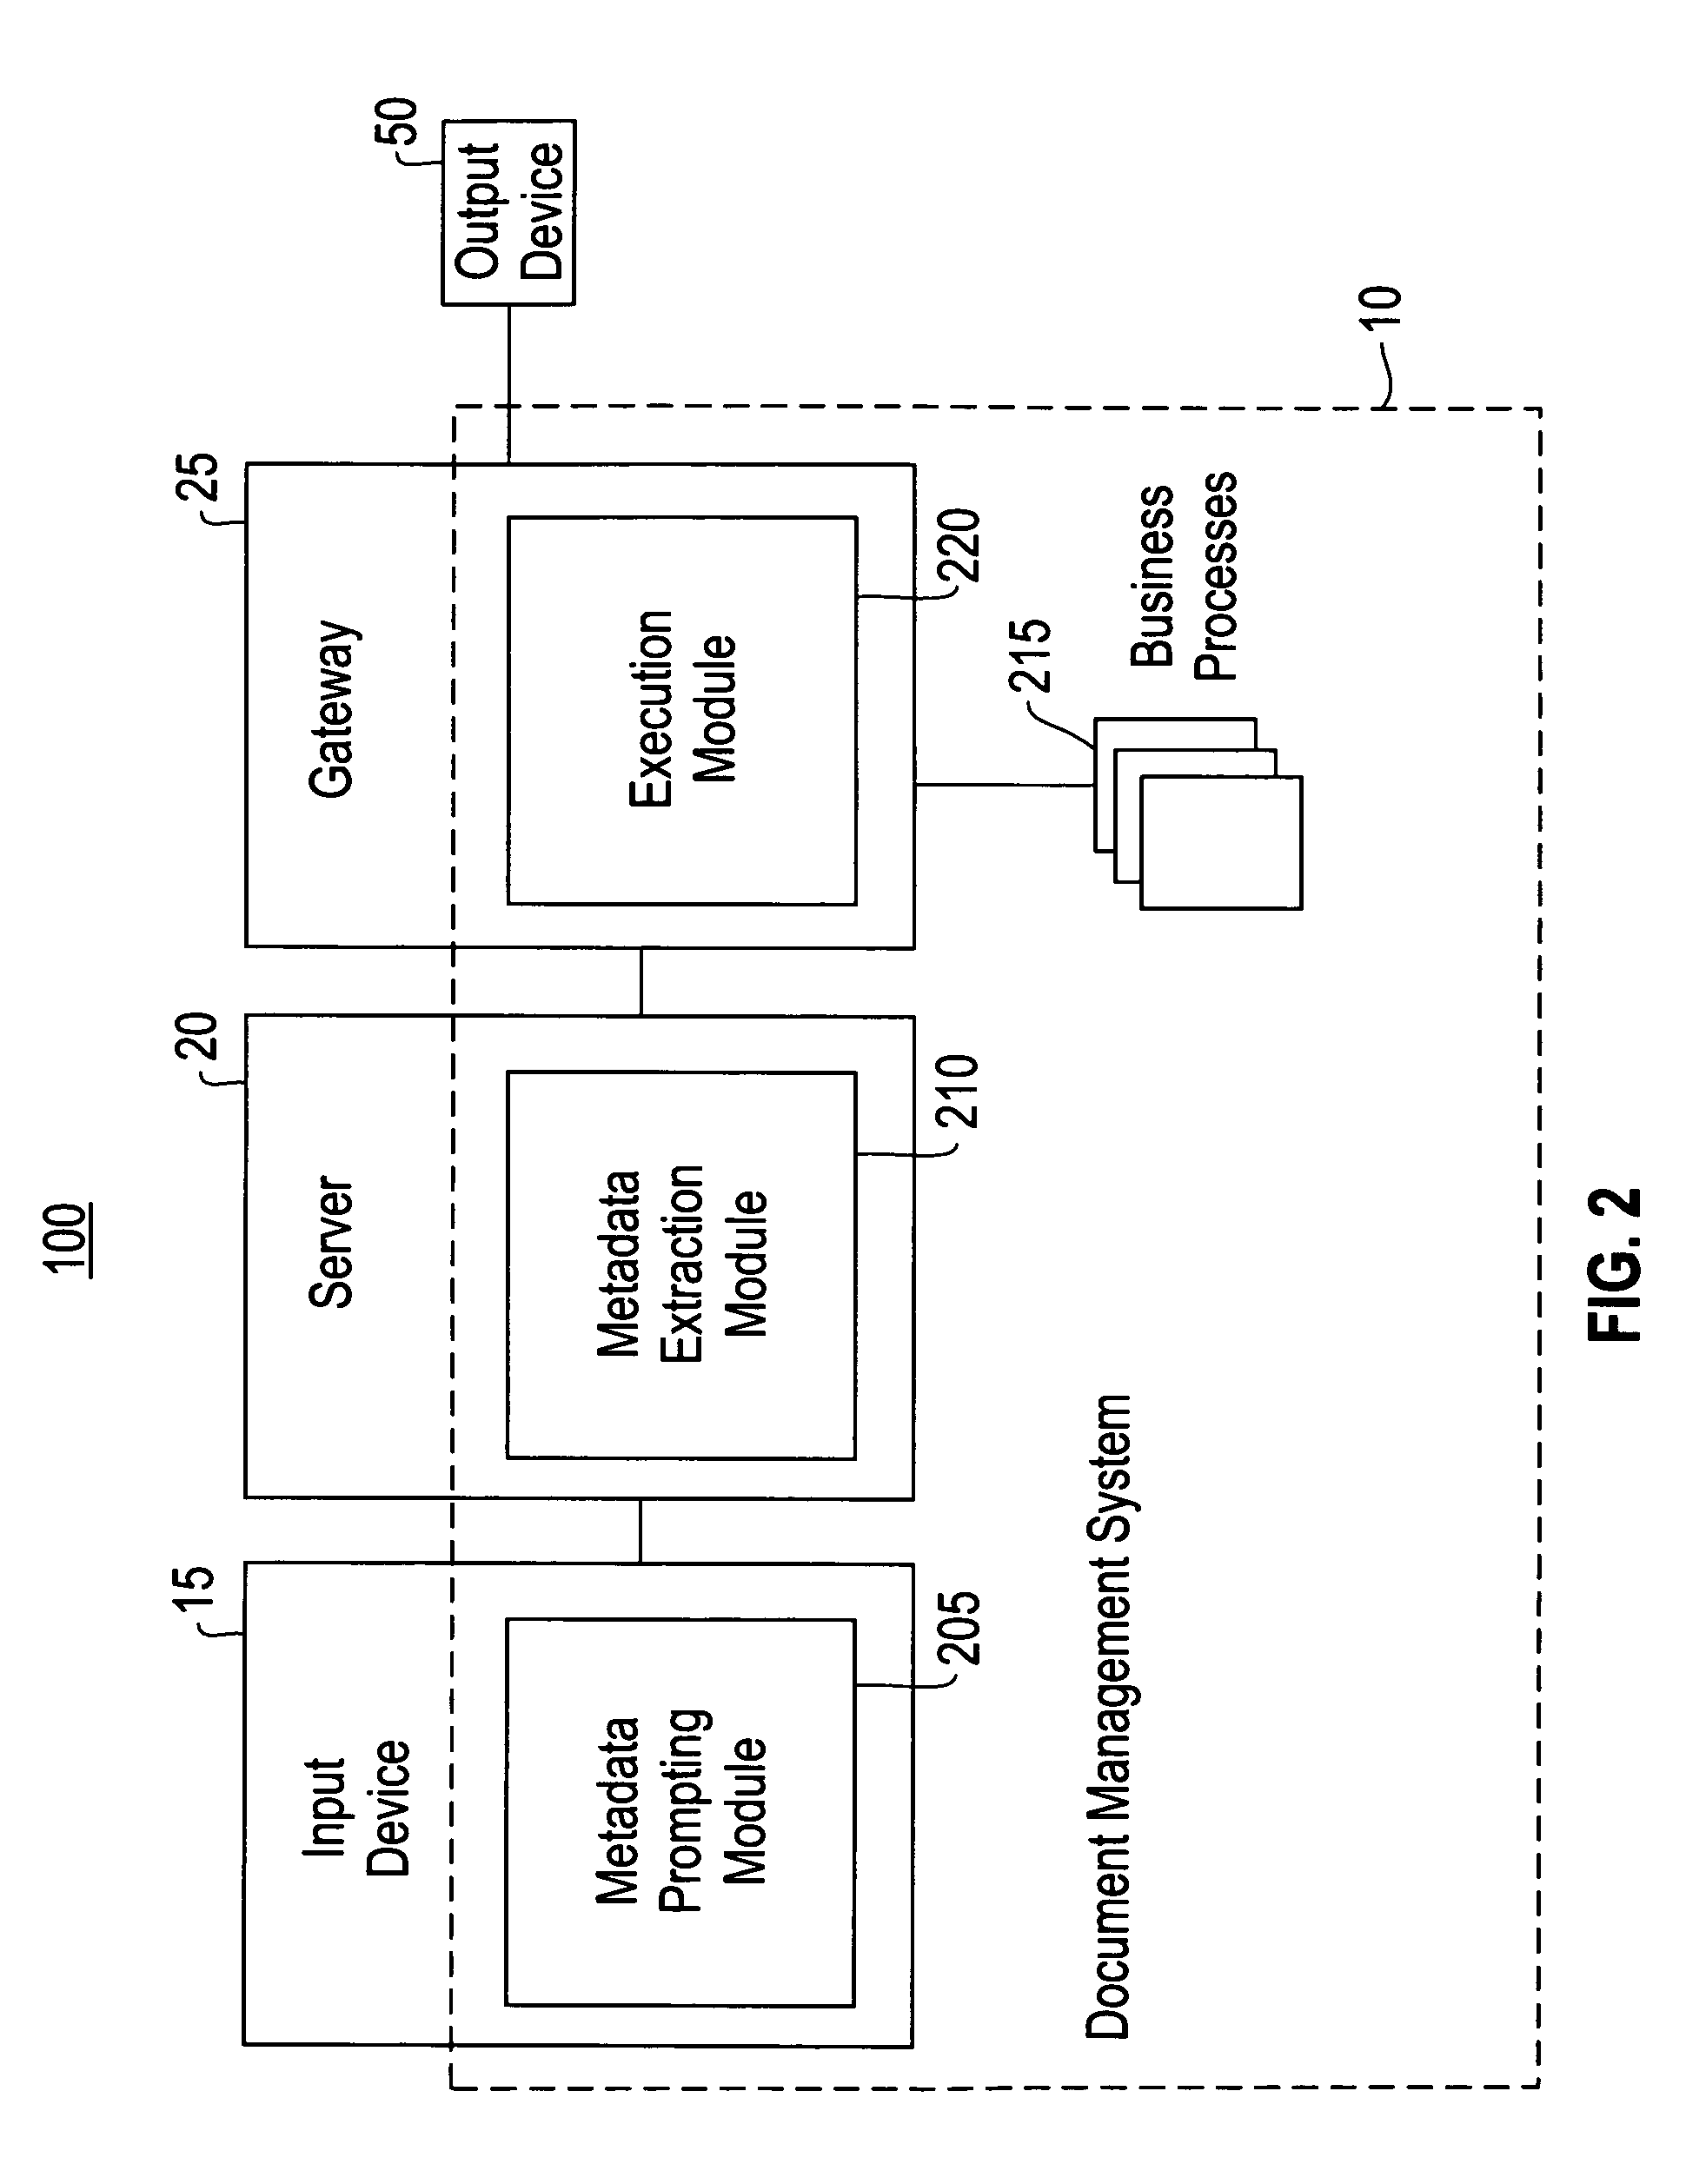 Method for automatically and dynamically composing document management applications